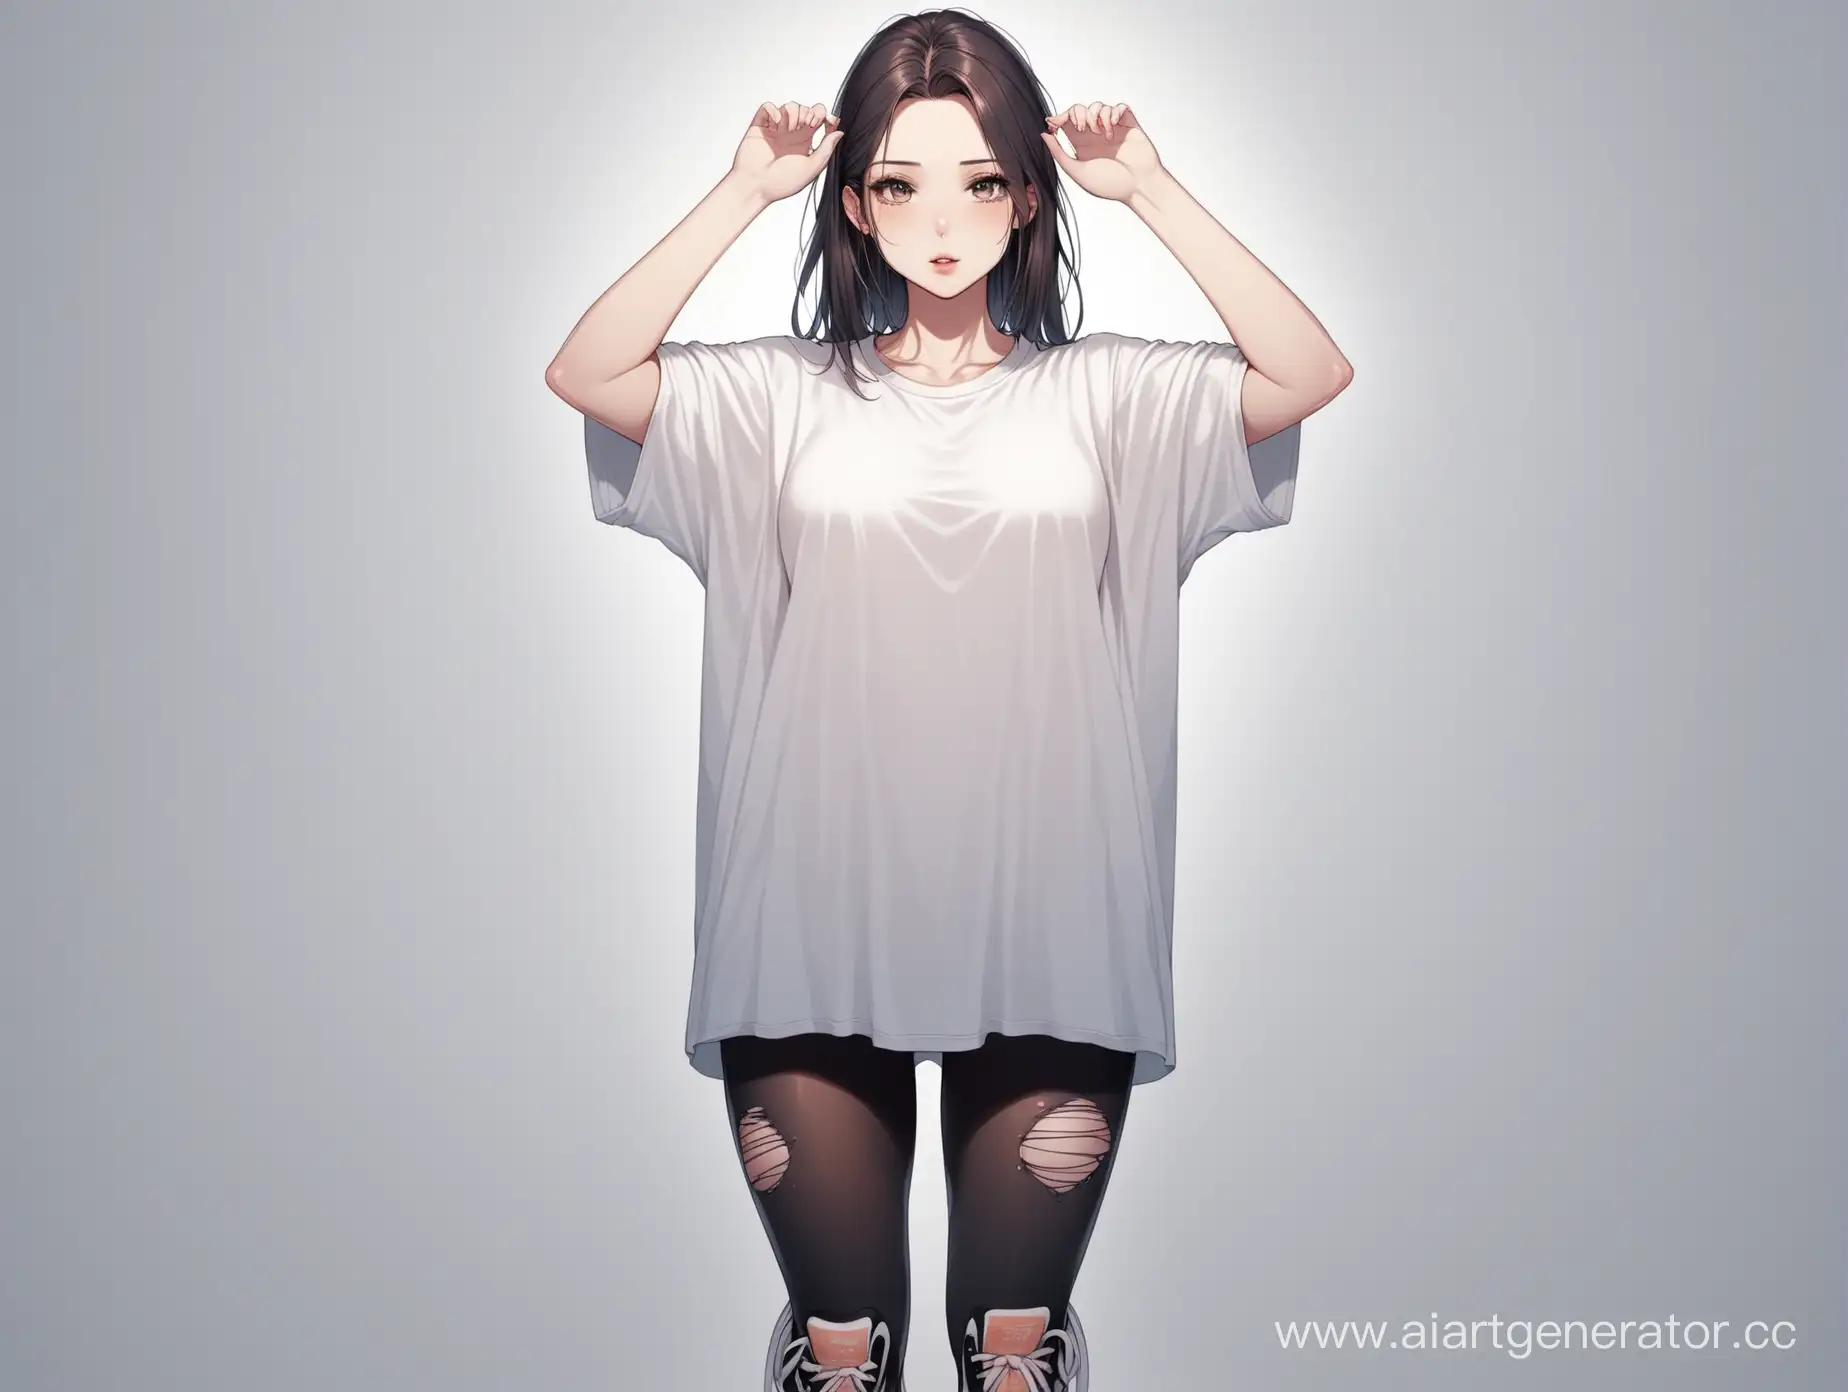 Generate an image of an attractive girl wearing an oversize T-shirt and sneakers. The girl has to lift up her T-shirt with her hands to show the scary implants underneath. Pay attention to the fact that the girl herself looks beautiful and aesthetically pleasing.